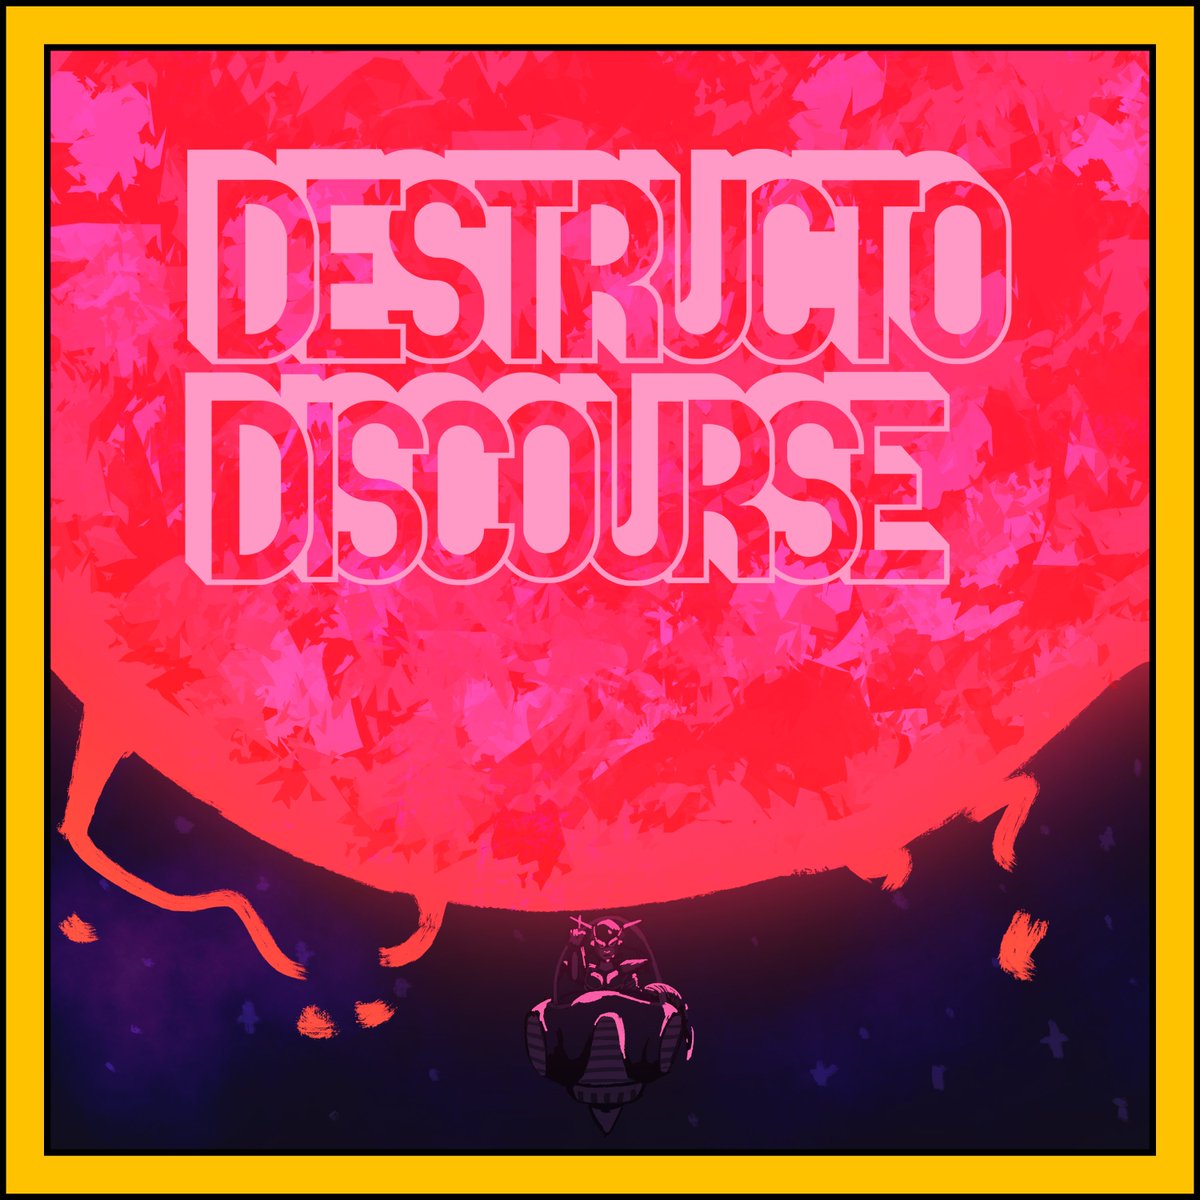 The covers i've illustrated going over the sagas for  @Destructo_Disc - a thread